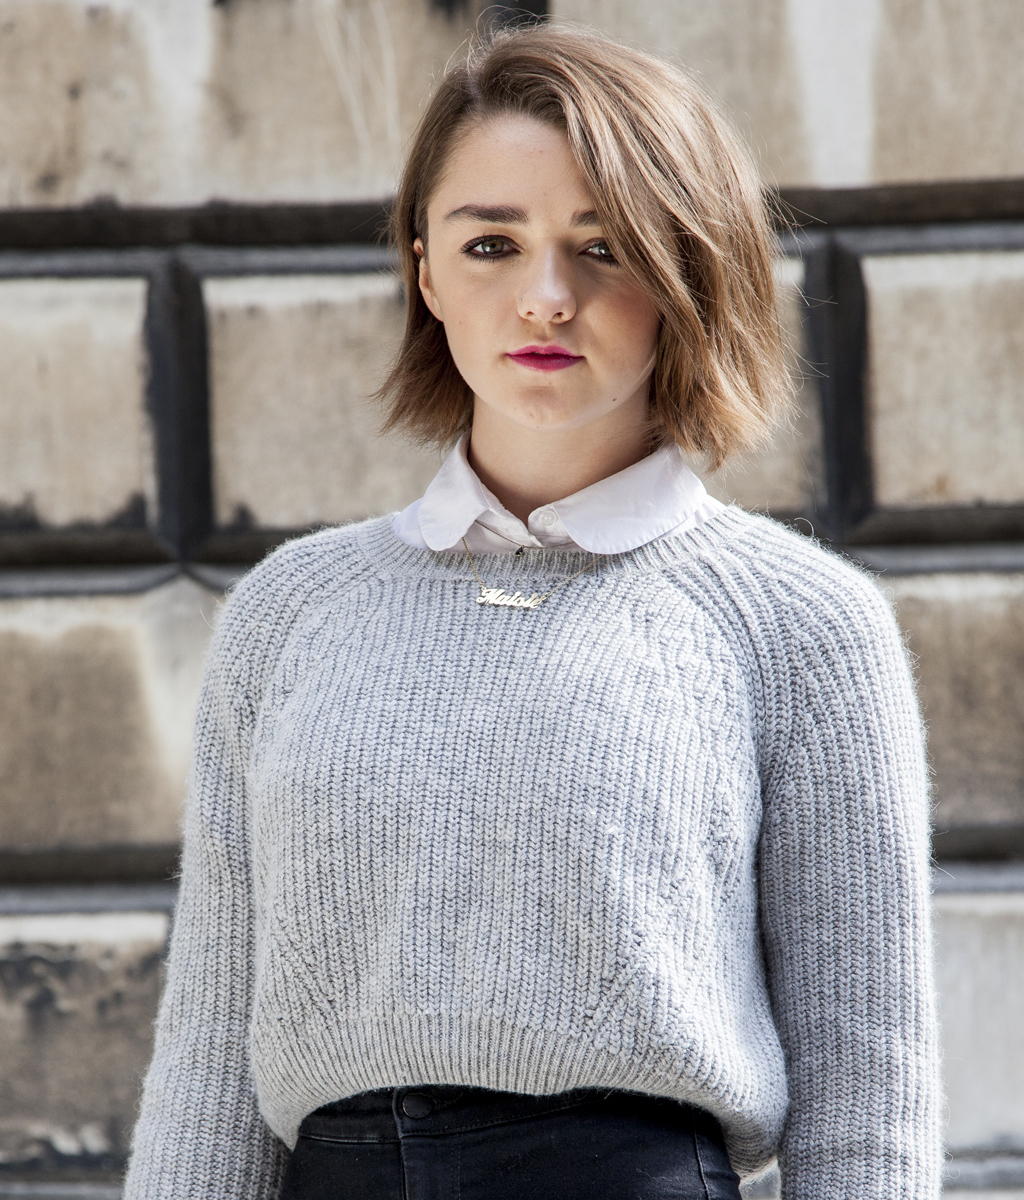 Maisie Williams Interview The Falling Time Out Film